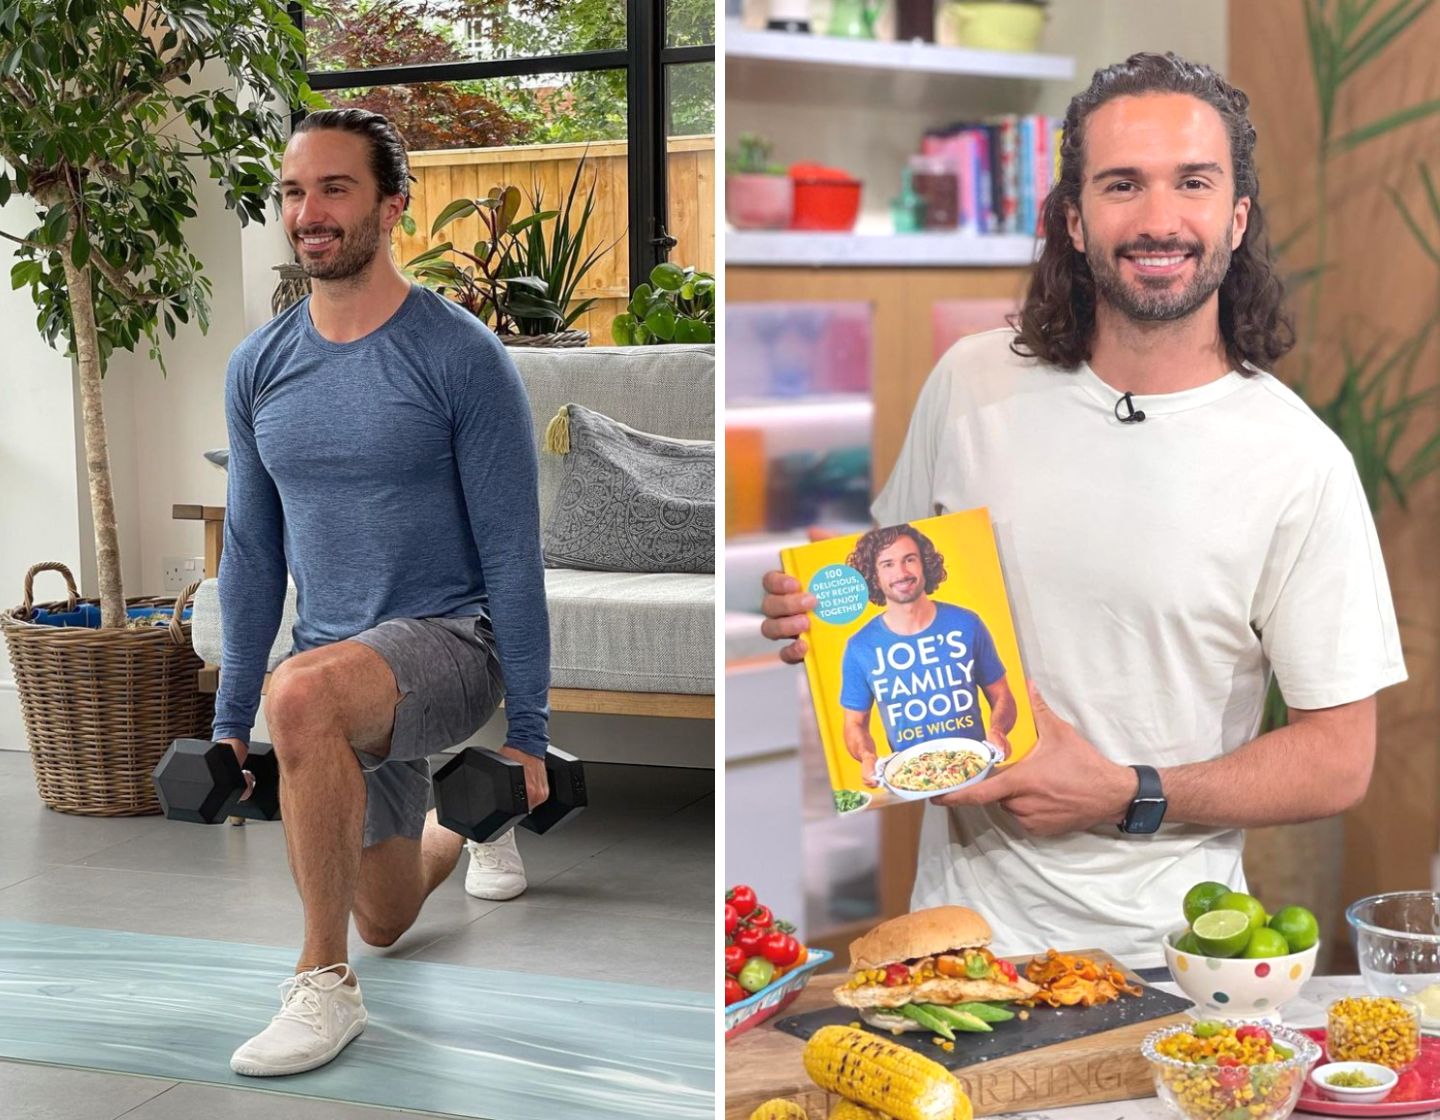 We caught up with Joe Wicks in Singapore to chat parenting three kids under four, his fave SG foods, why his top tips are 'move more and sleep more', and how his difficult childhood with his parents' mental health motivated him to break the cycle in his own parenting